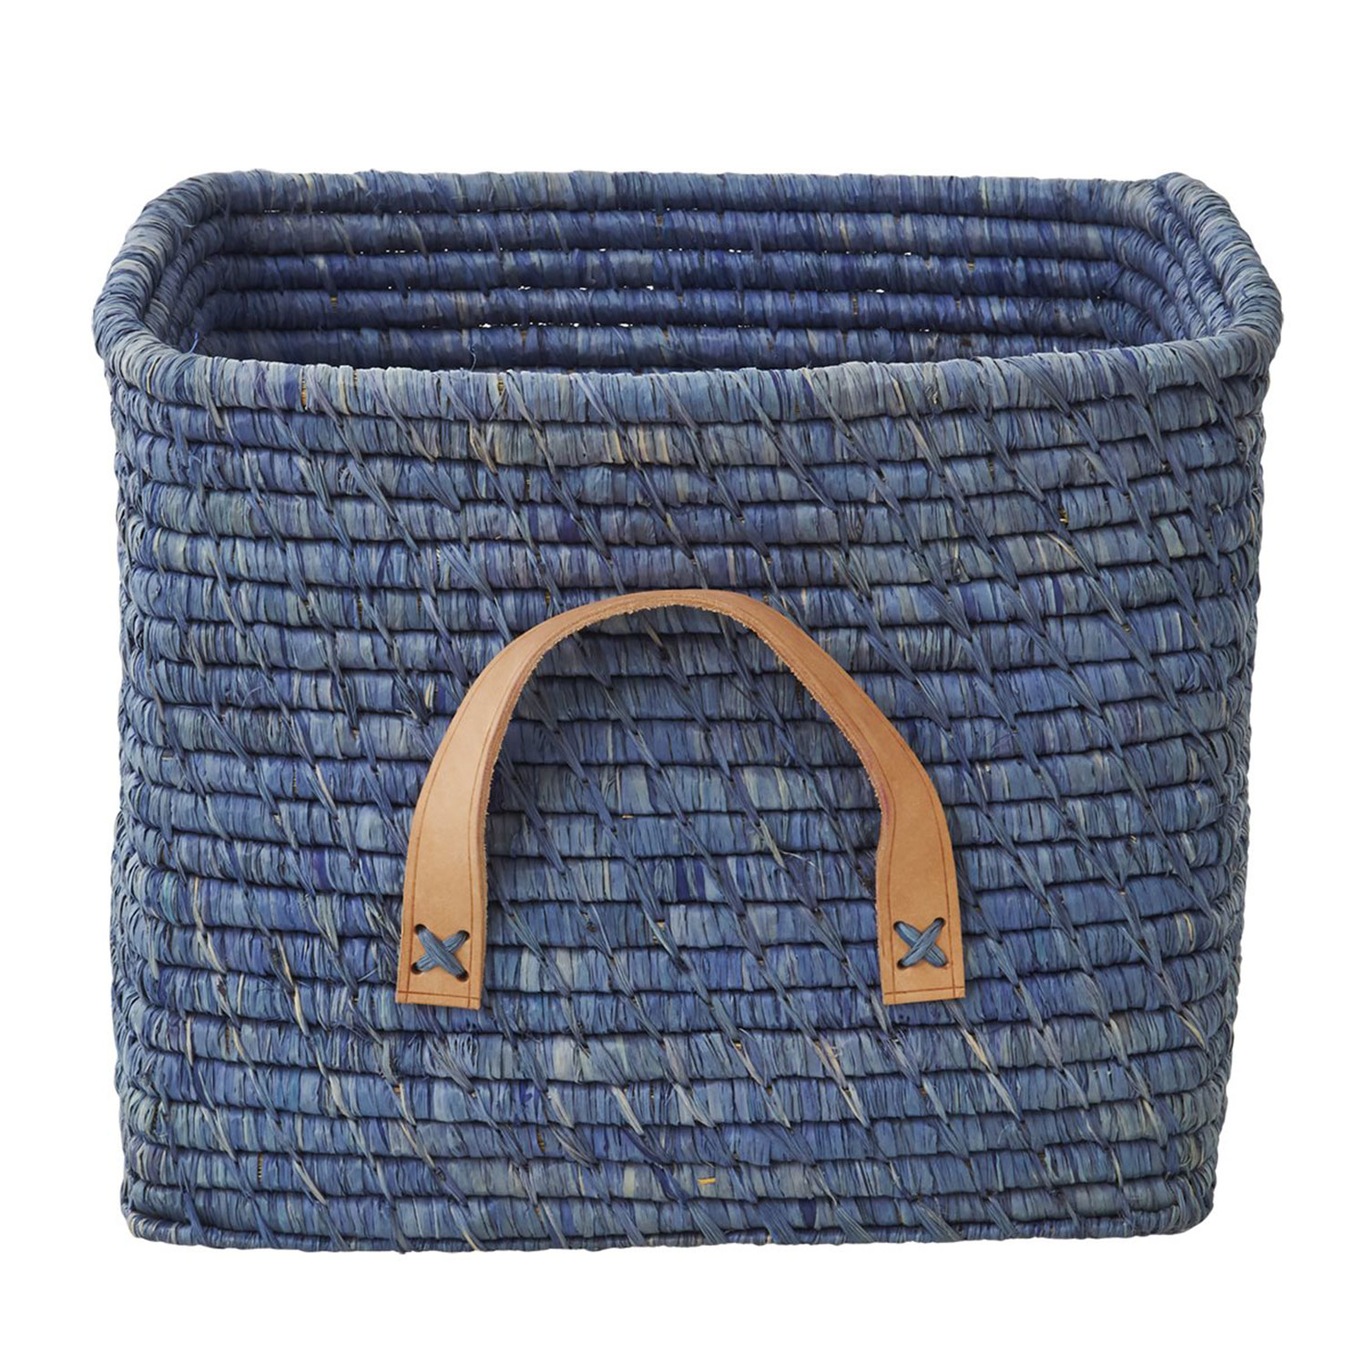 Basket with Leather Handles, Blue